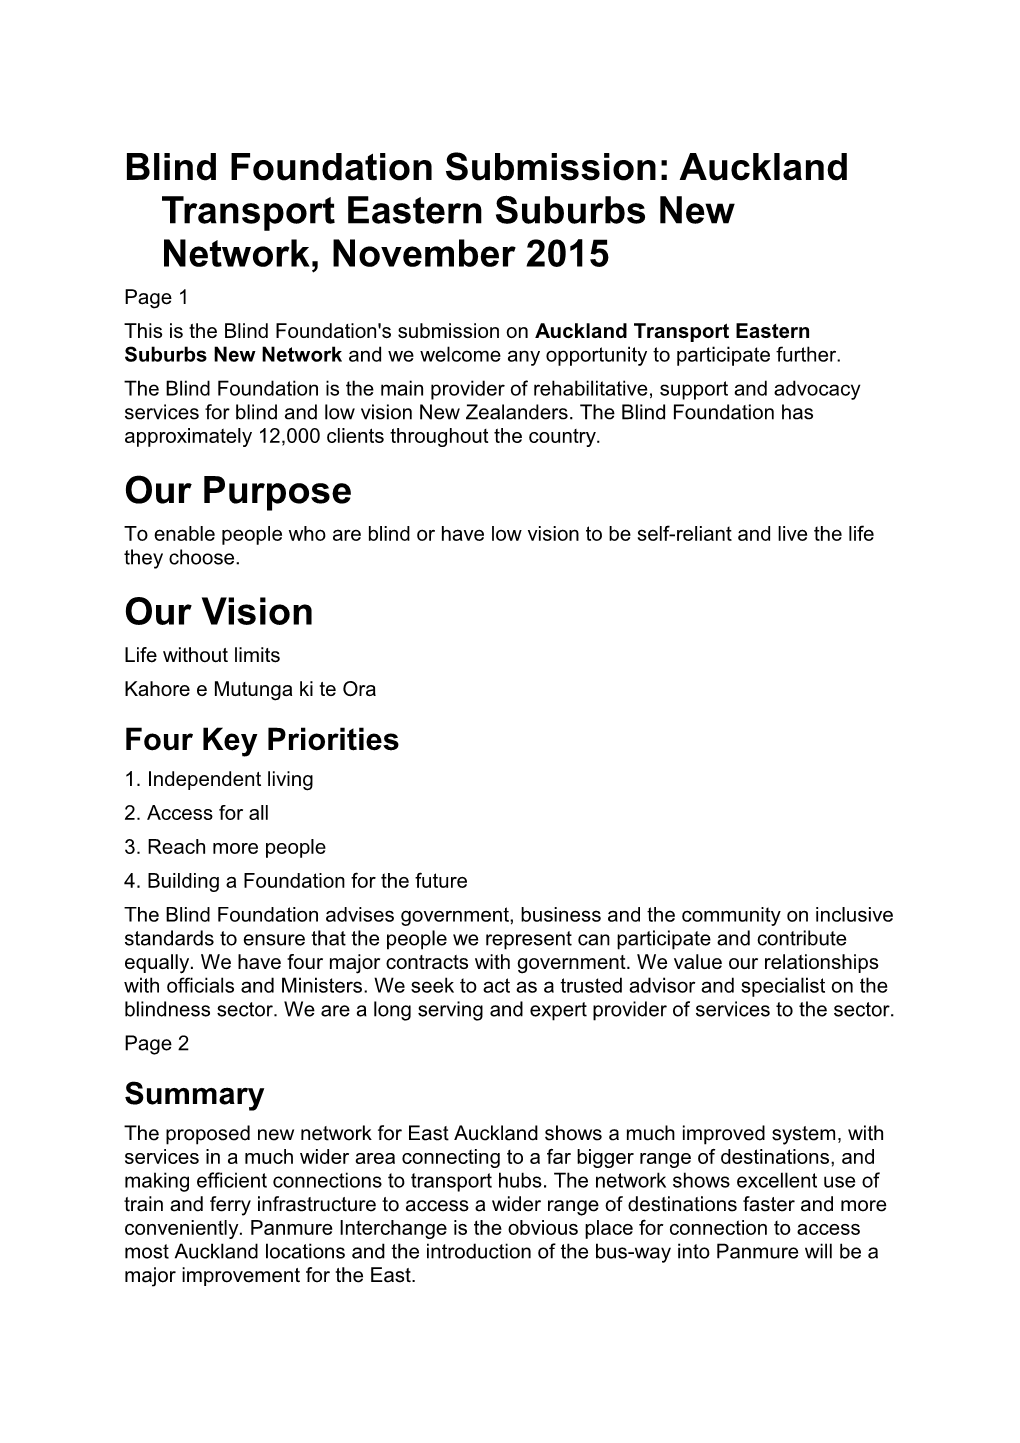 Blind Foundation Submission: Auckland Transport Eastern Suburbs New Network, November 2015